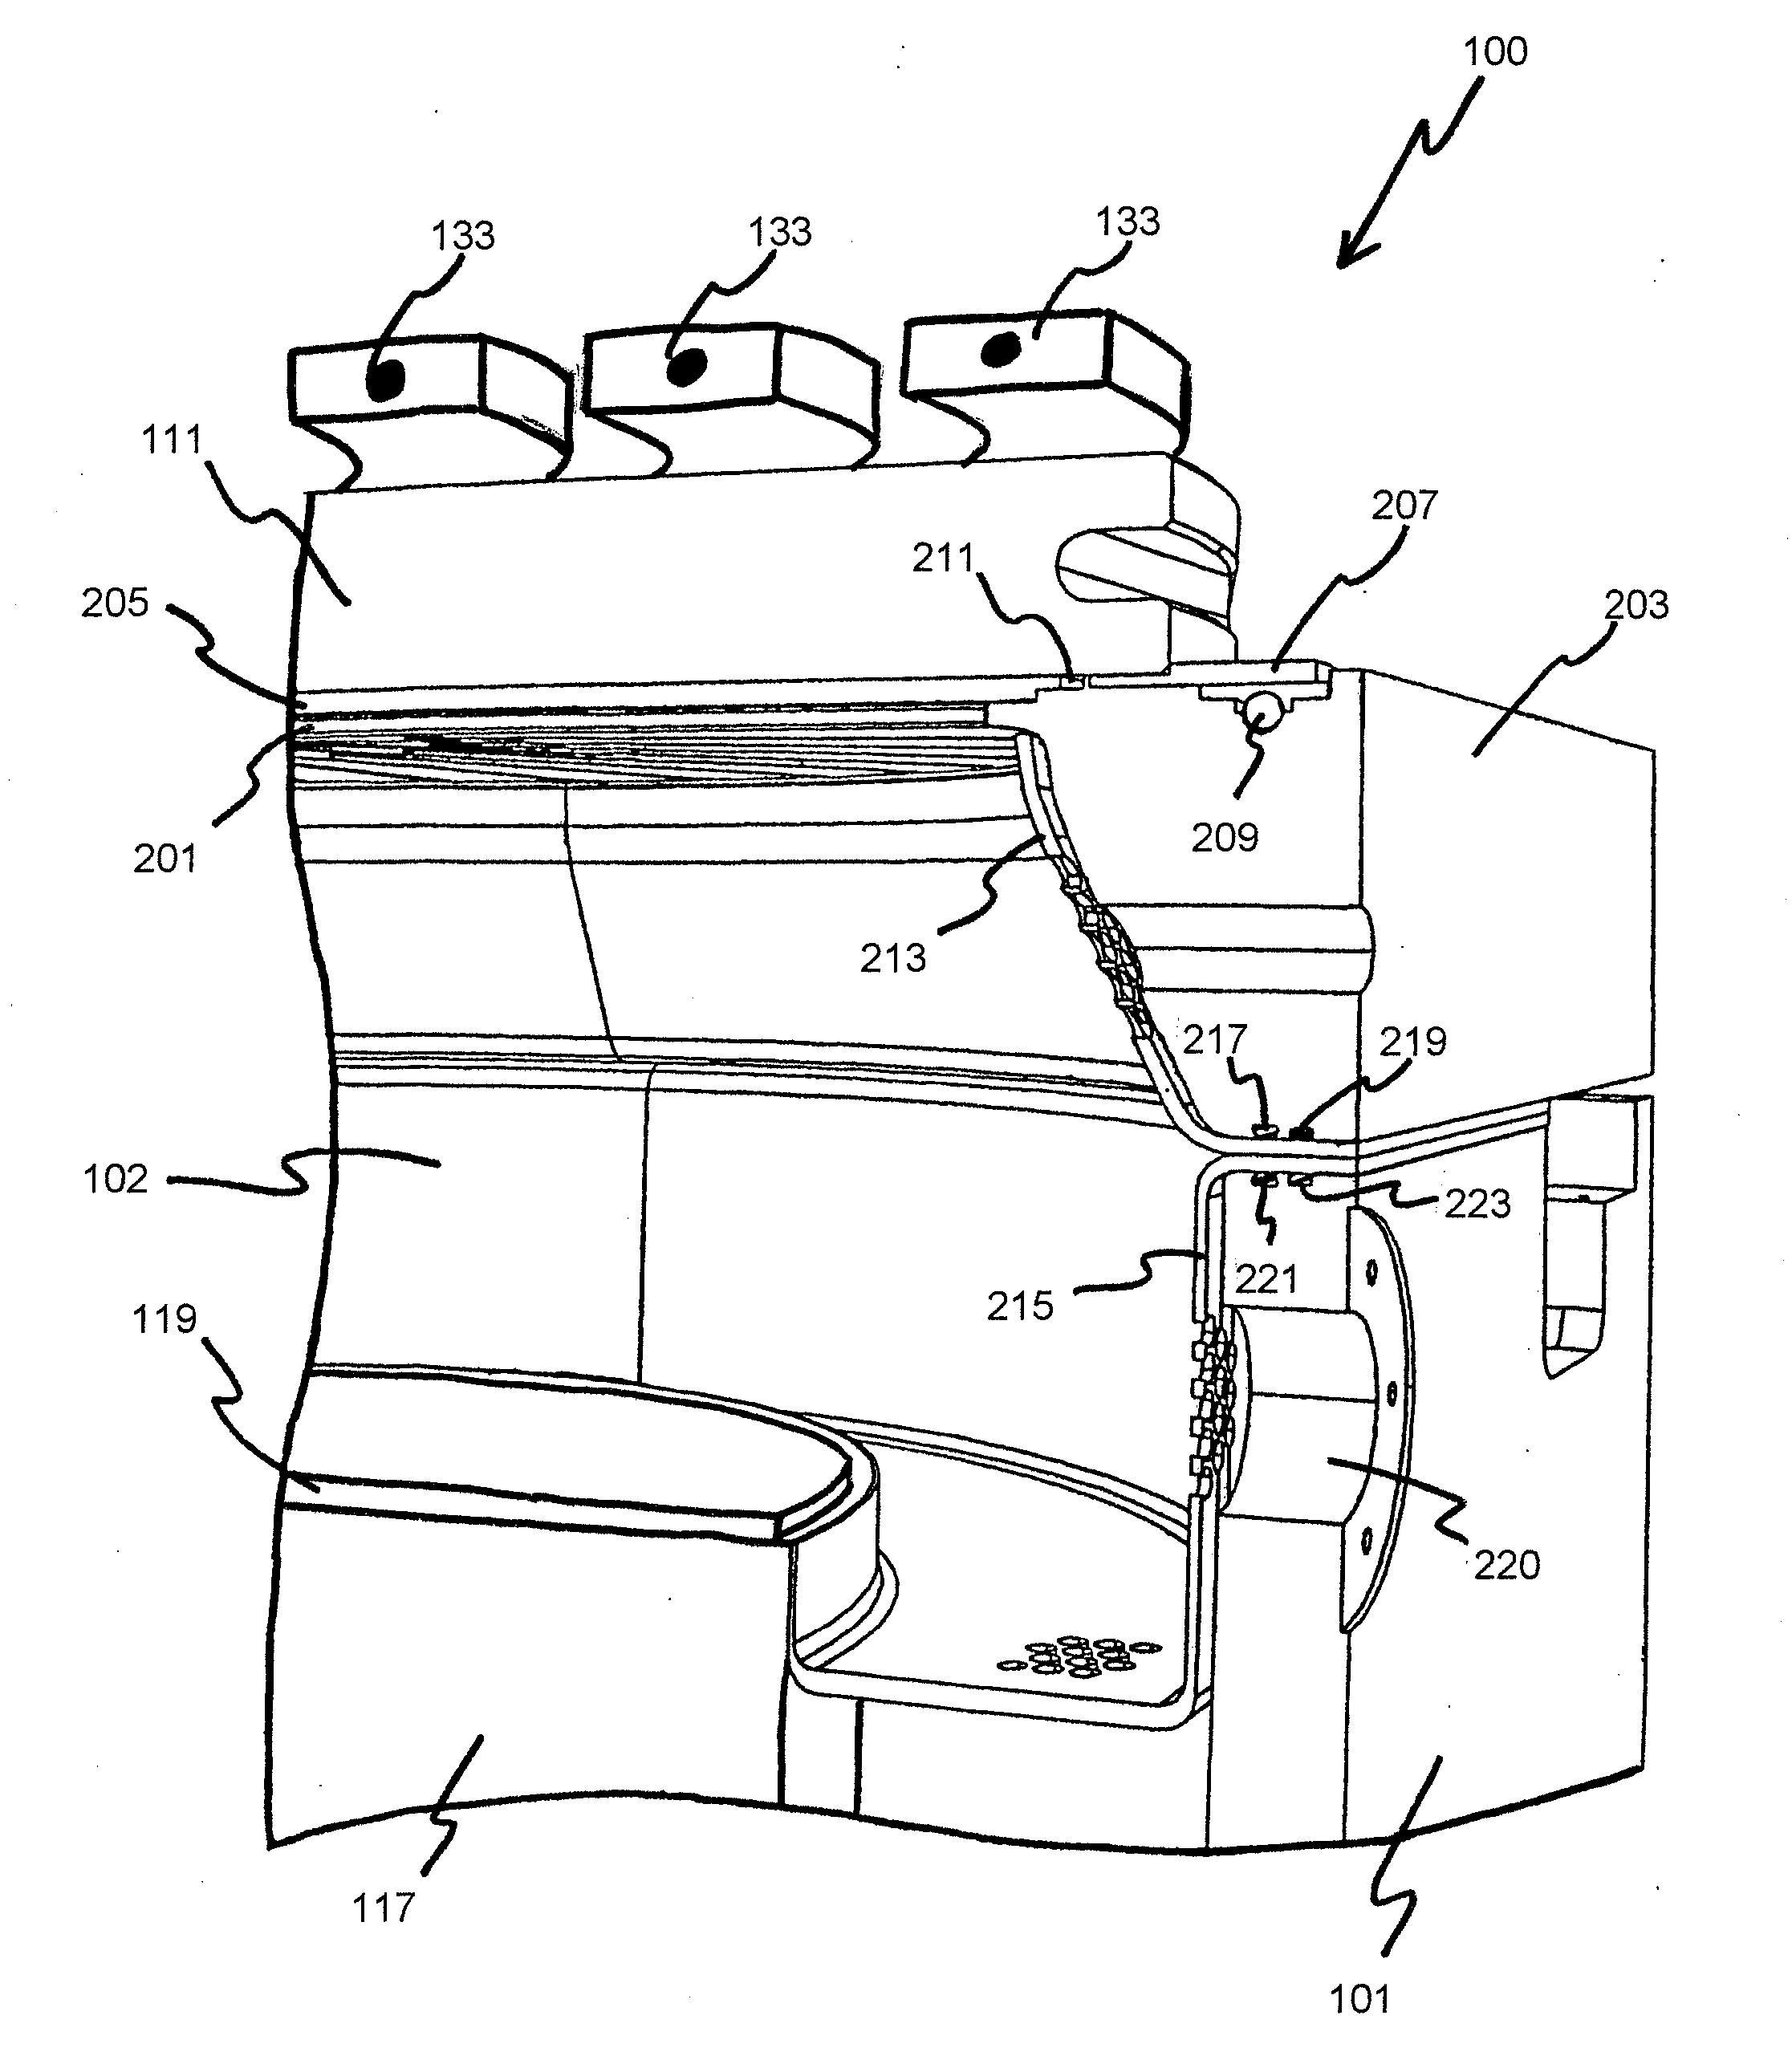 Faraday Shield Disposed Within An Inductively Coupled Plasma Etching apparatus